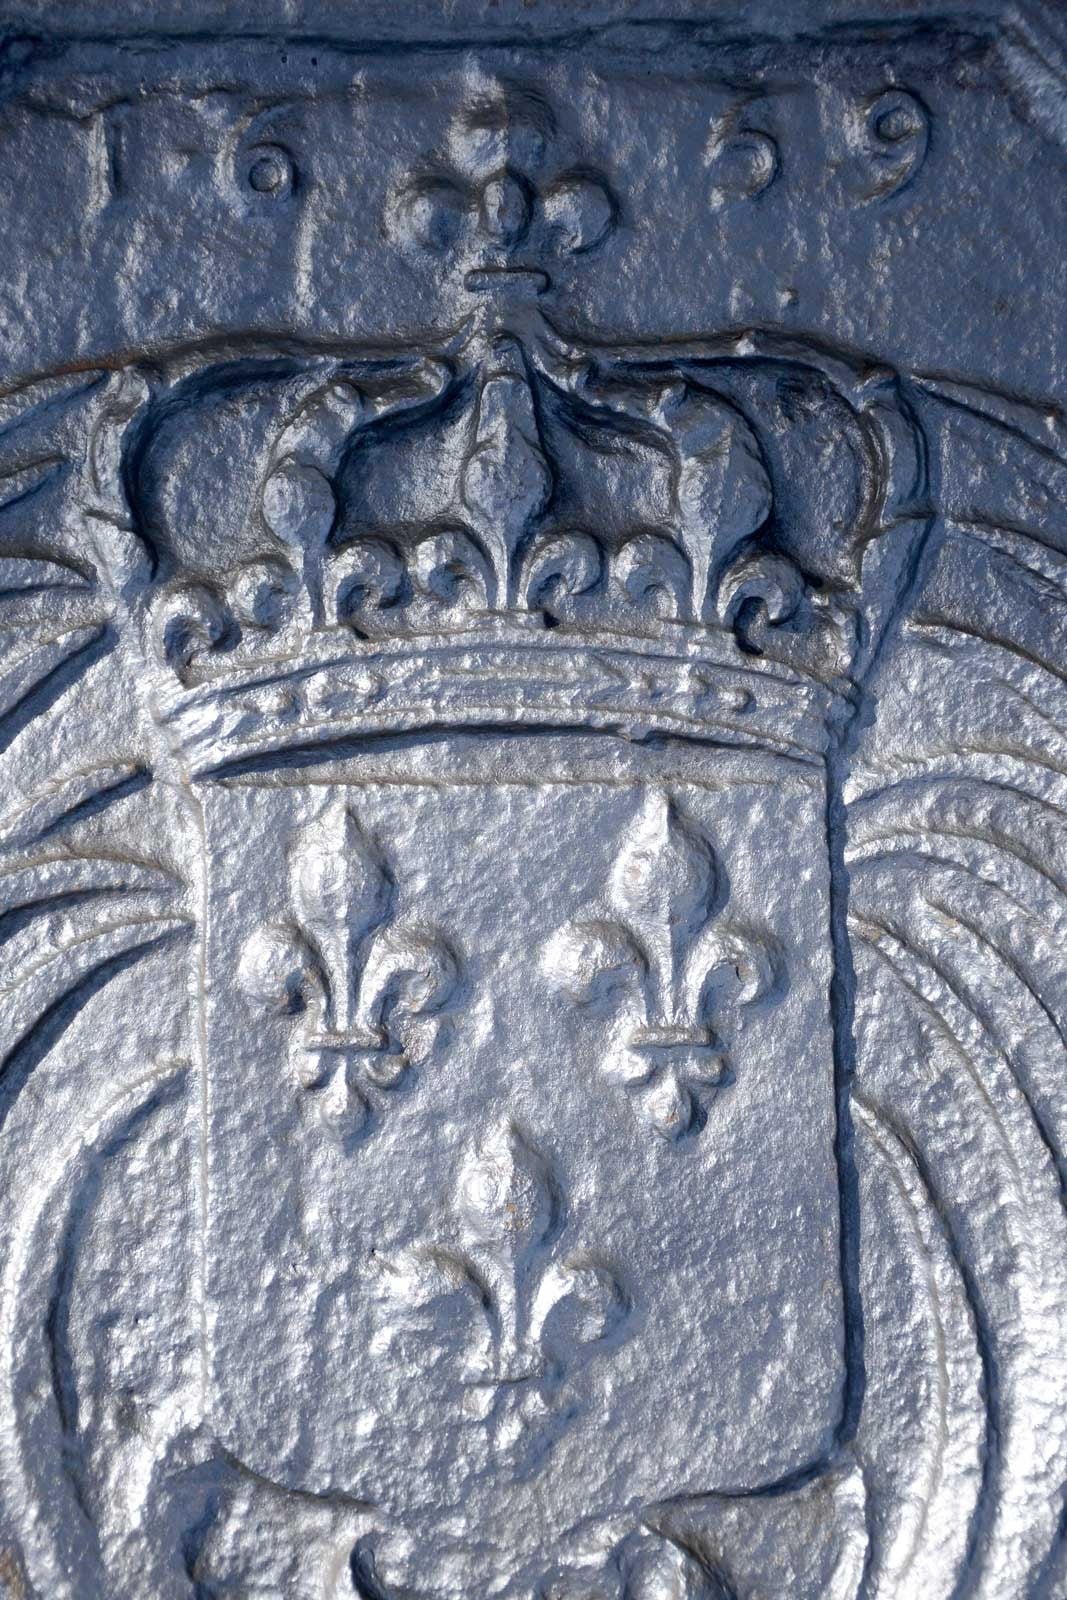 Dated from 1639 cast iron fireback representing the Royal Arms of France surrounded by palms. This fireback would come from the Château de Marly.